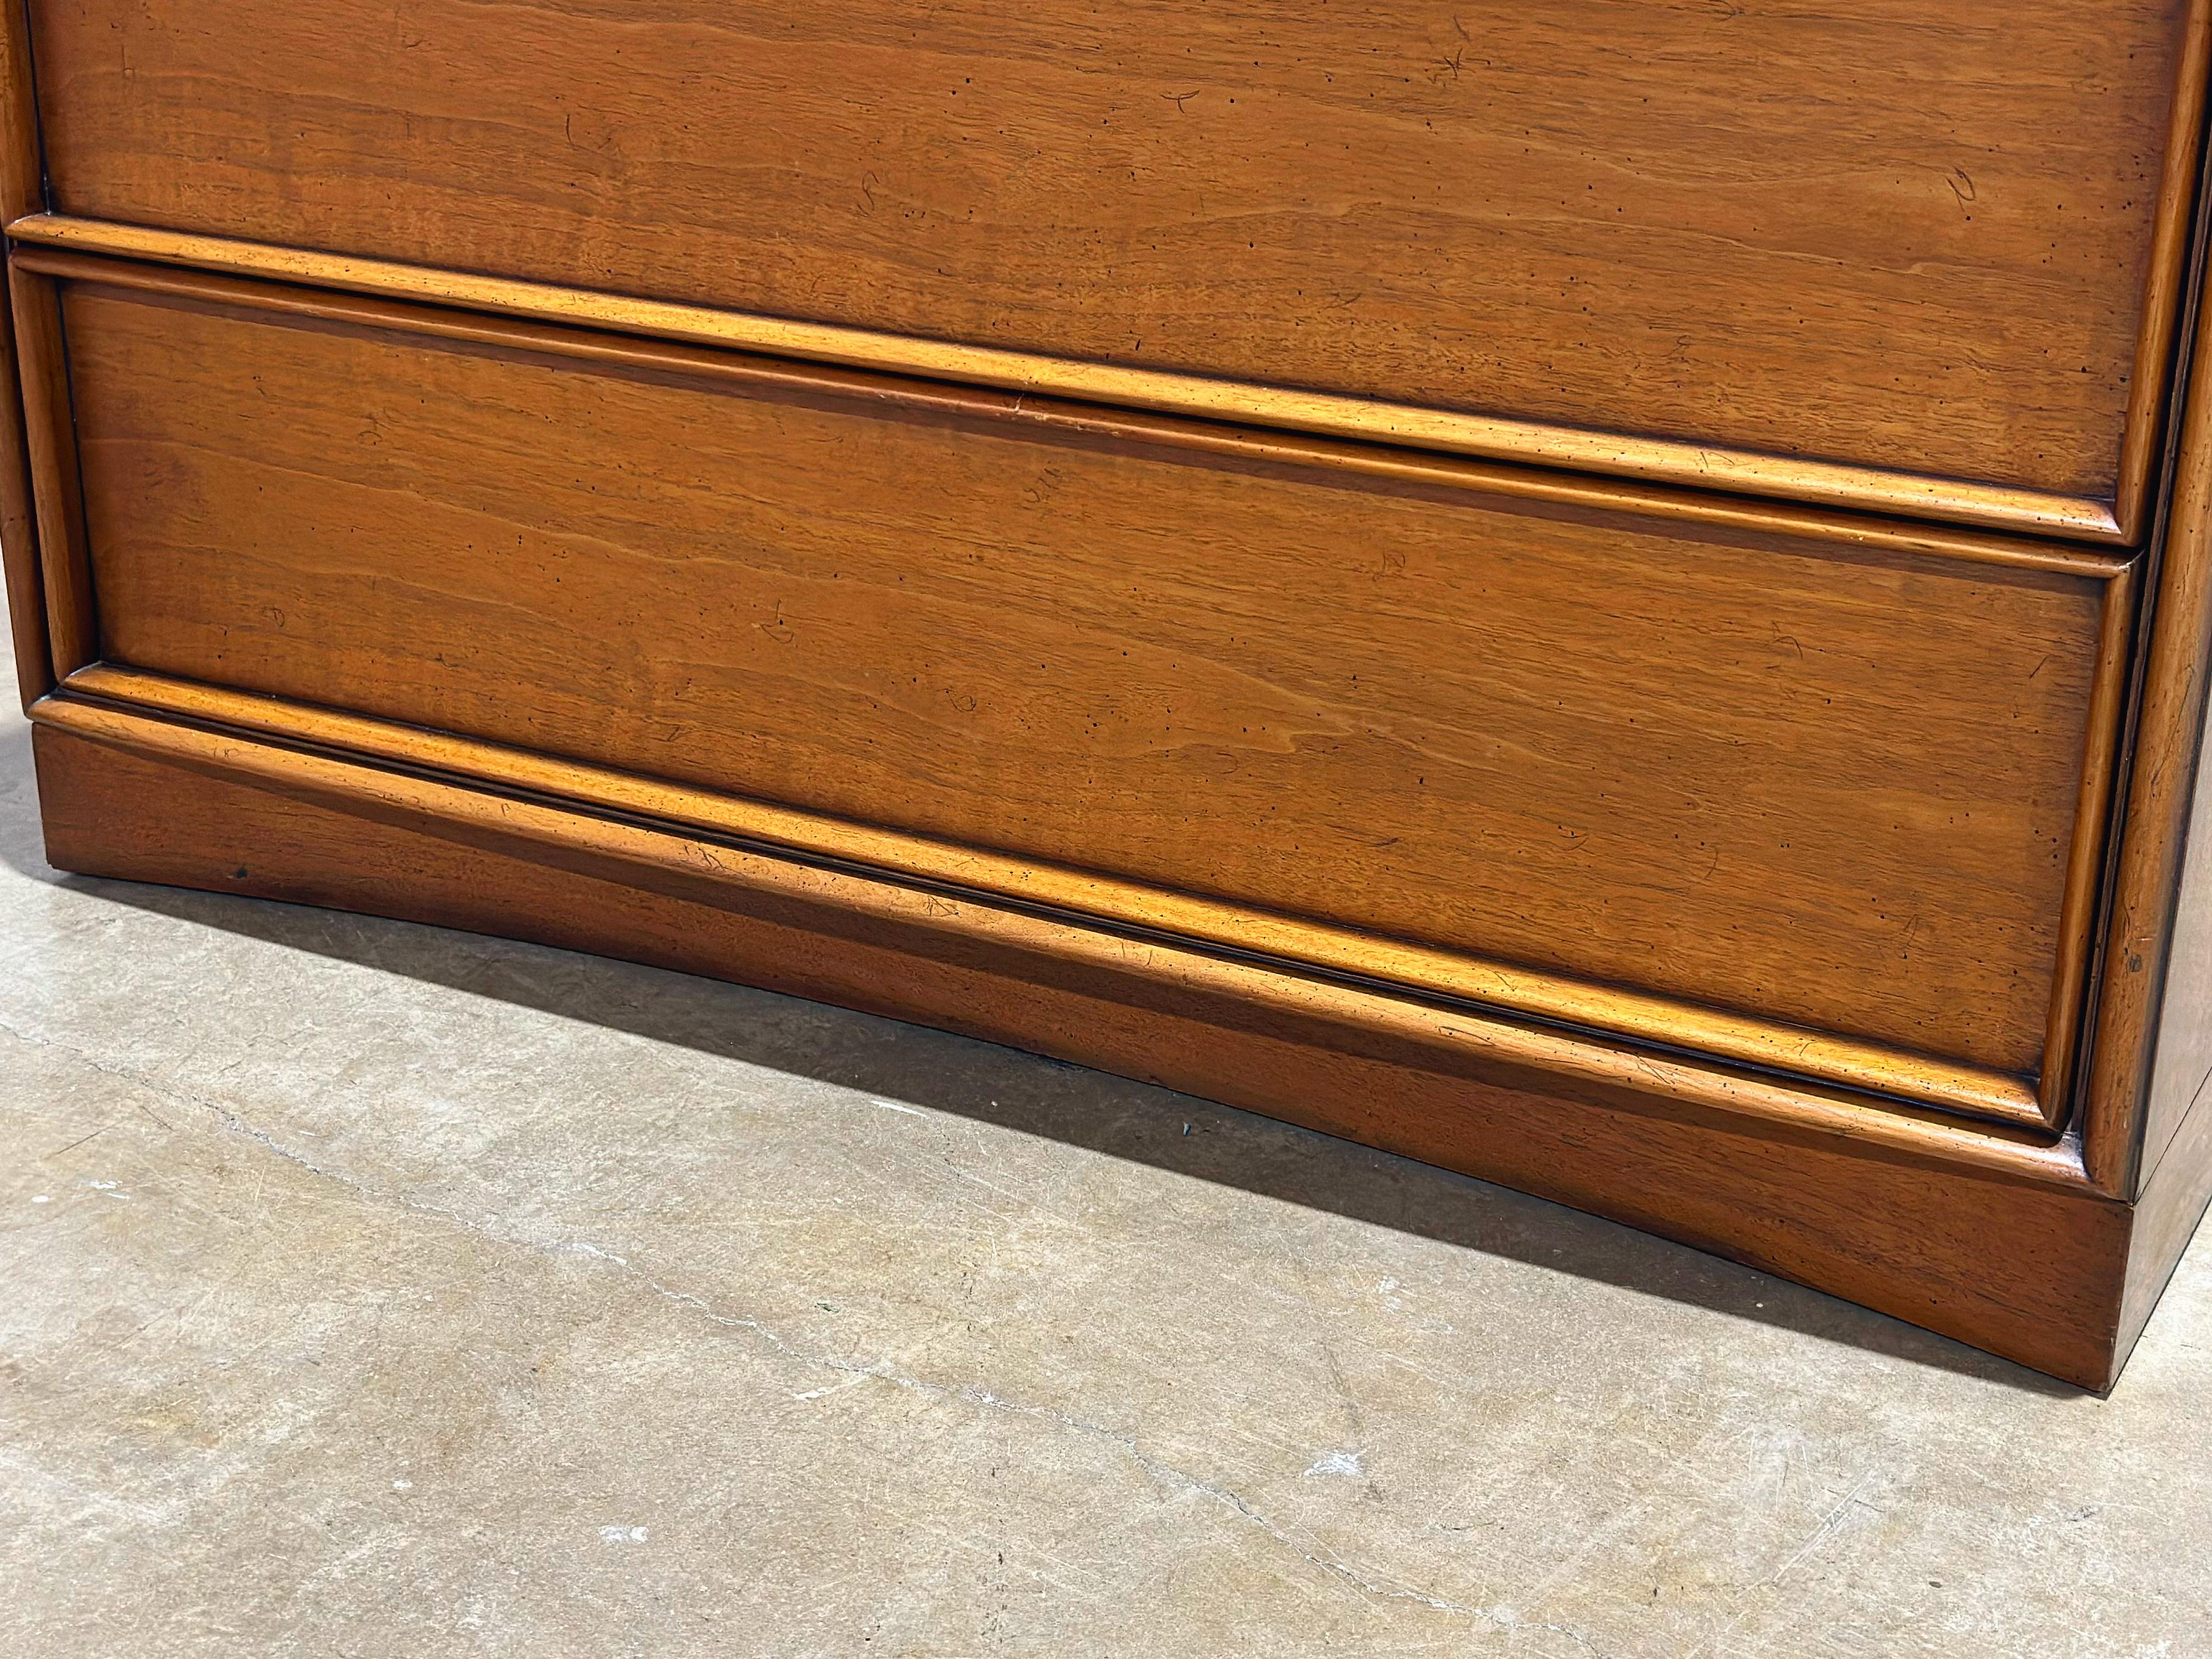 North American Pair Dresser Chests by TH Robsjohn Gibbings for Widdicomb - Walnut Nightstands